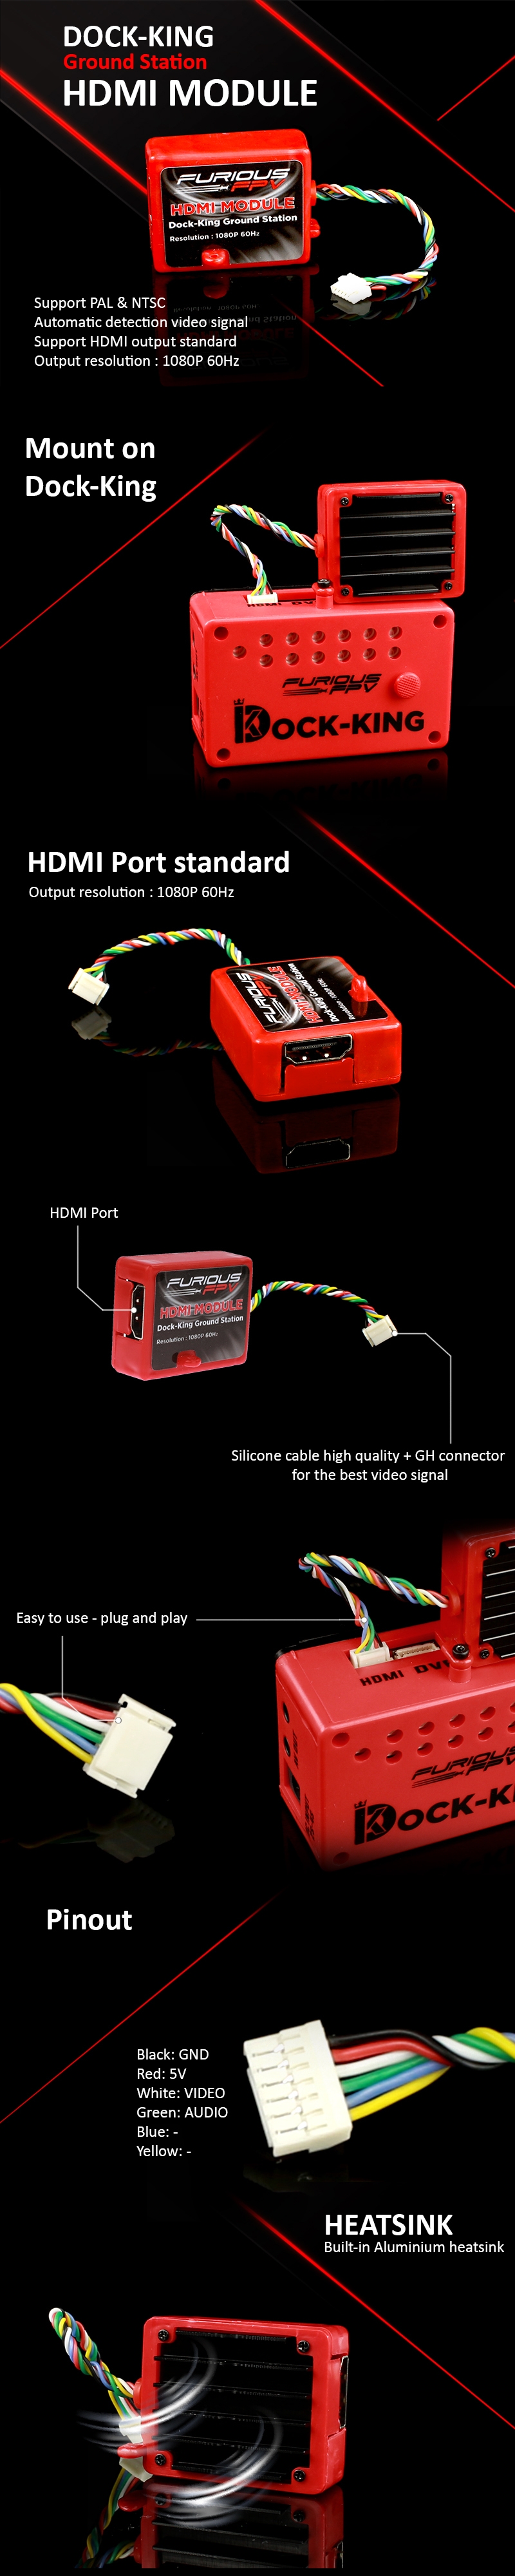 FuriousFPV HDMI Module For Dock-King Ground Station Support HD 1080P 60Hz Output Resolution